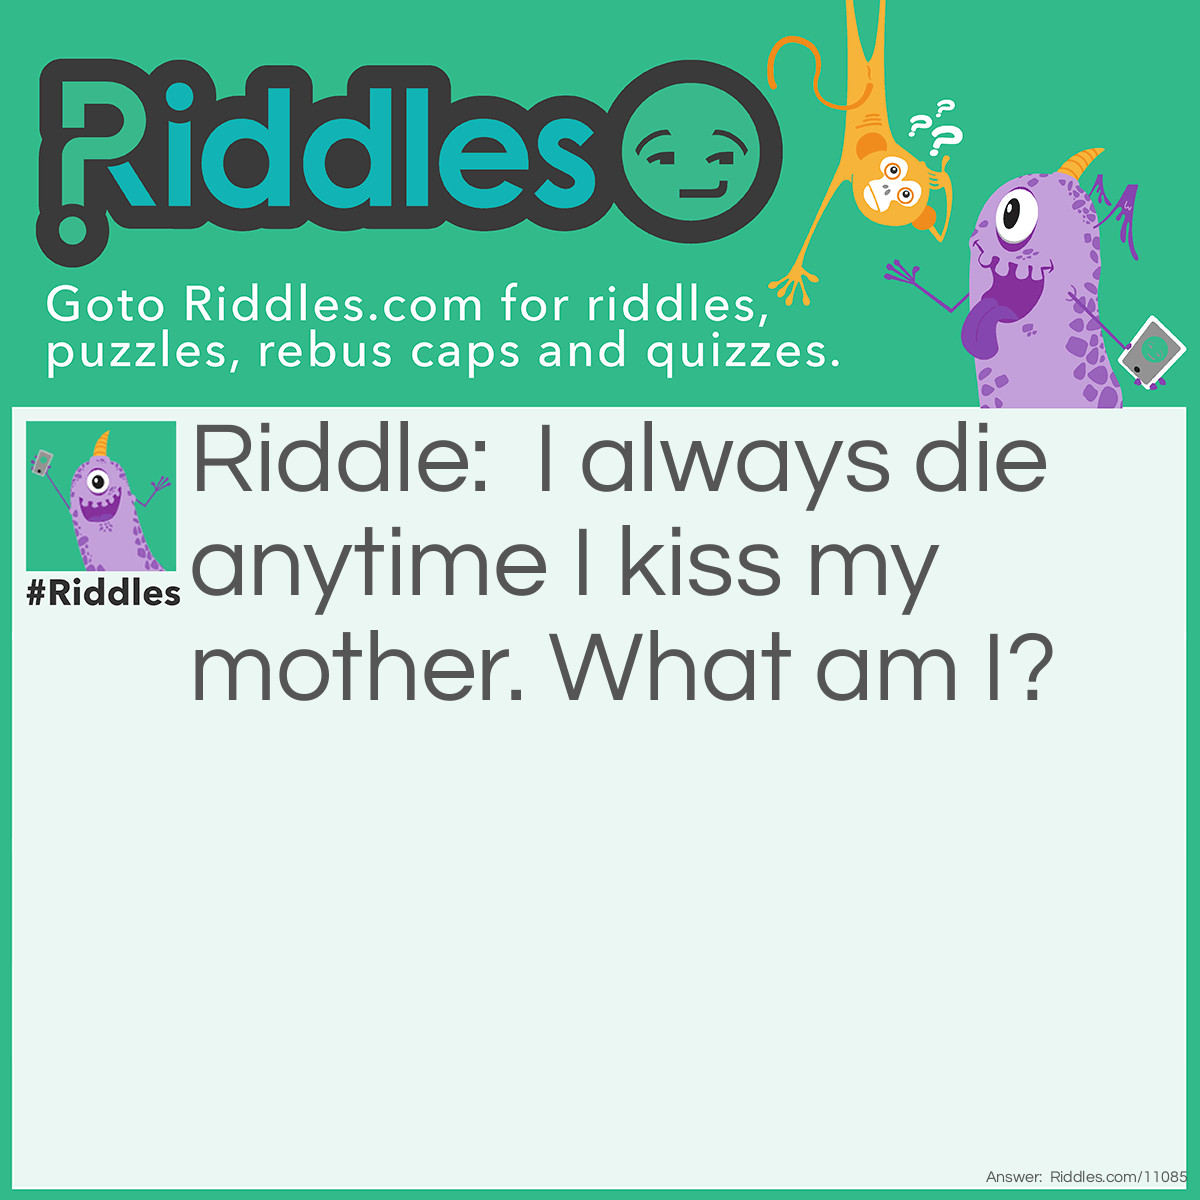 Riddle: I always die anytime I kiss my mother. What am I? Answer: Matches.